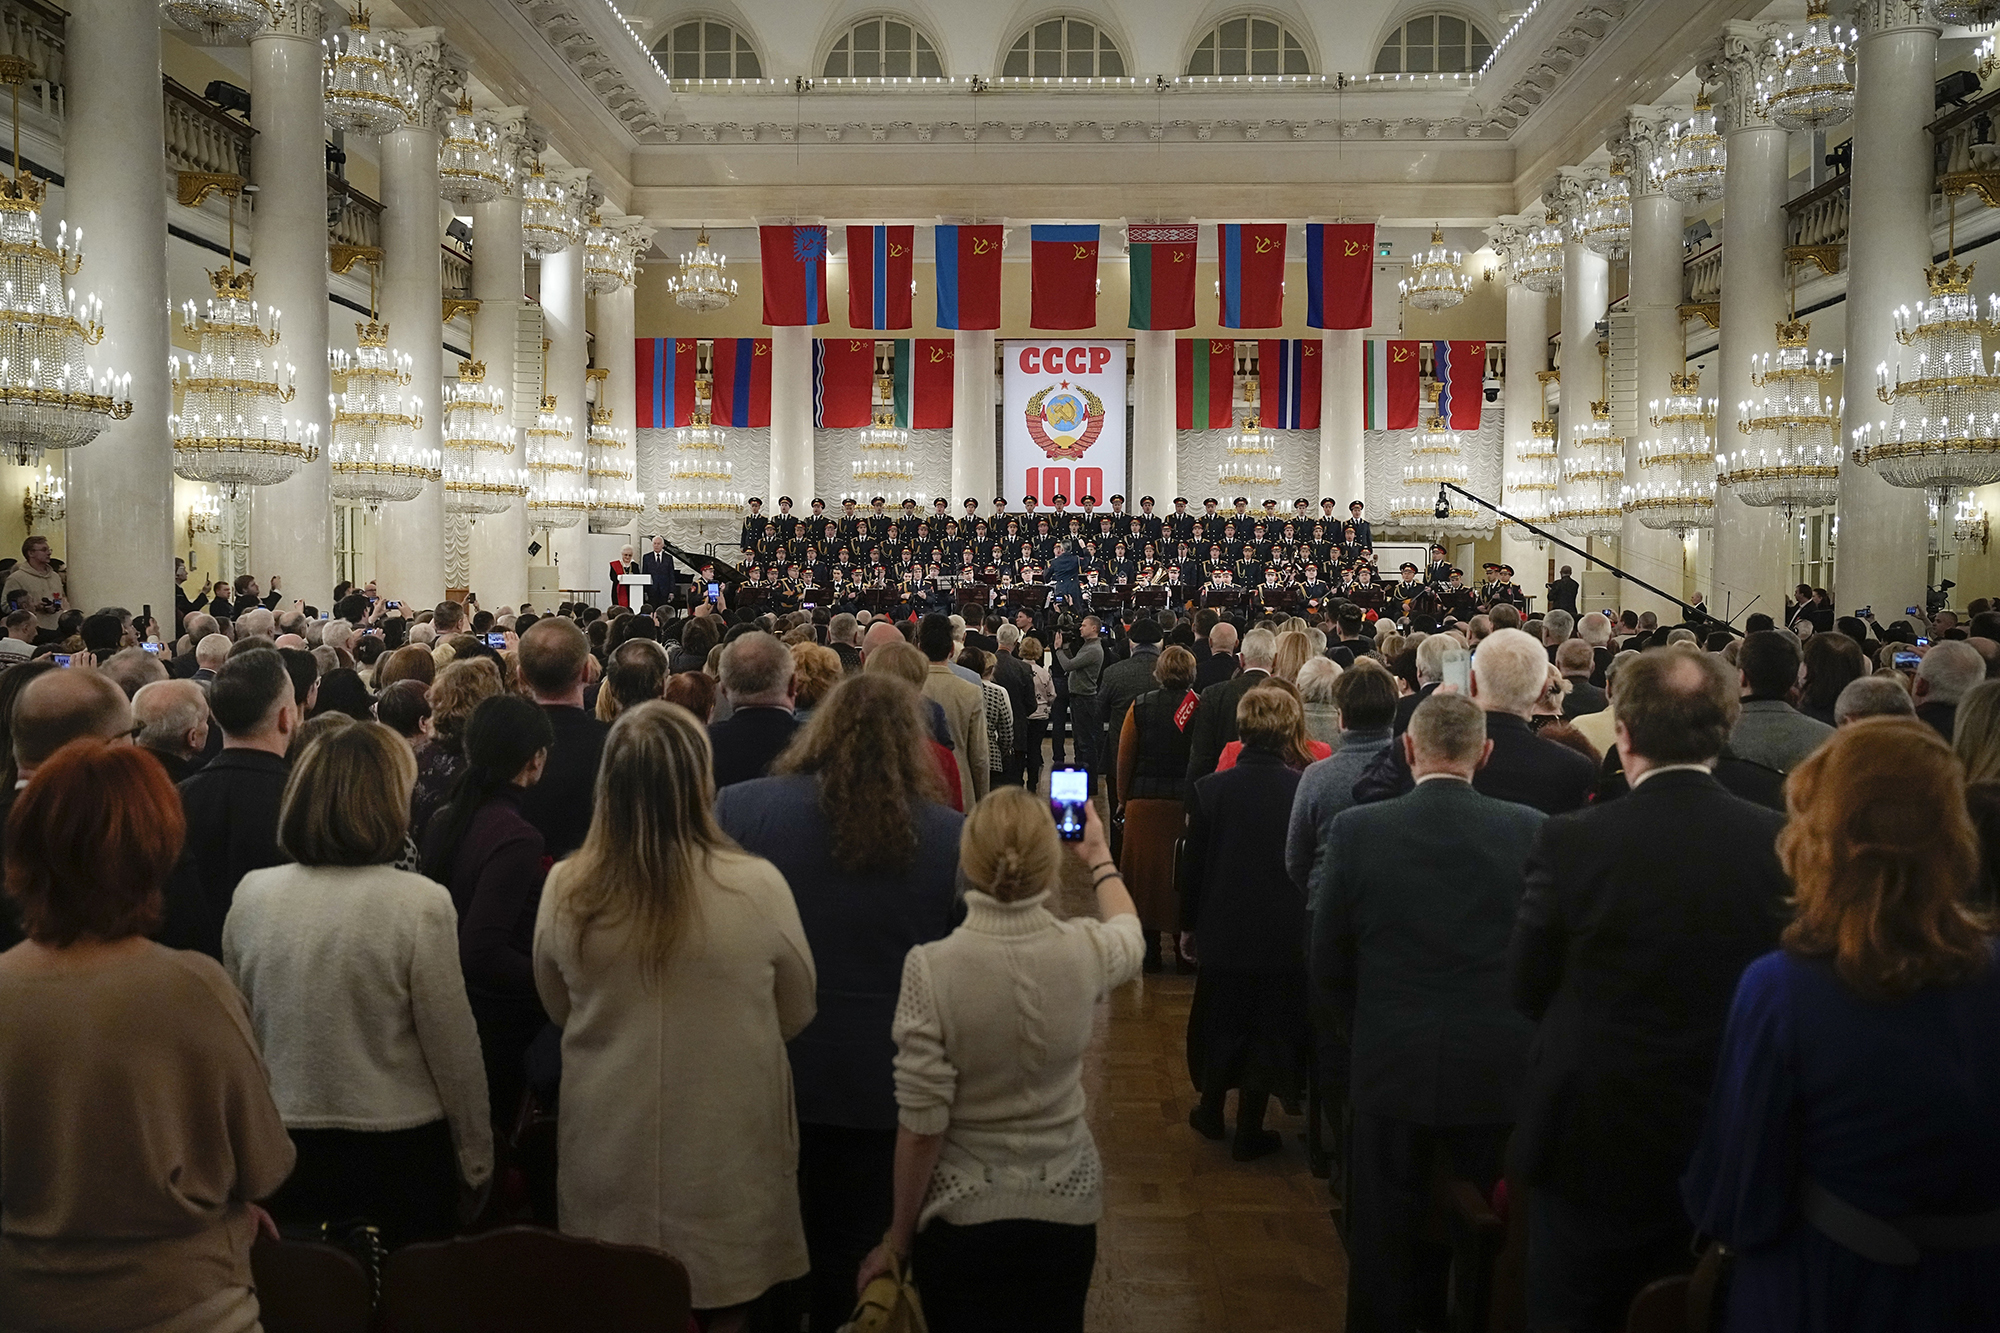 People listen to singers perform the Soviet anthem in a hall lined with columns and chandeliers